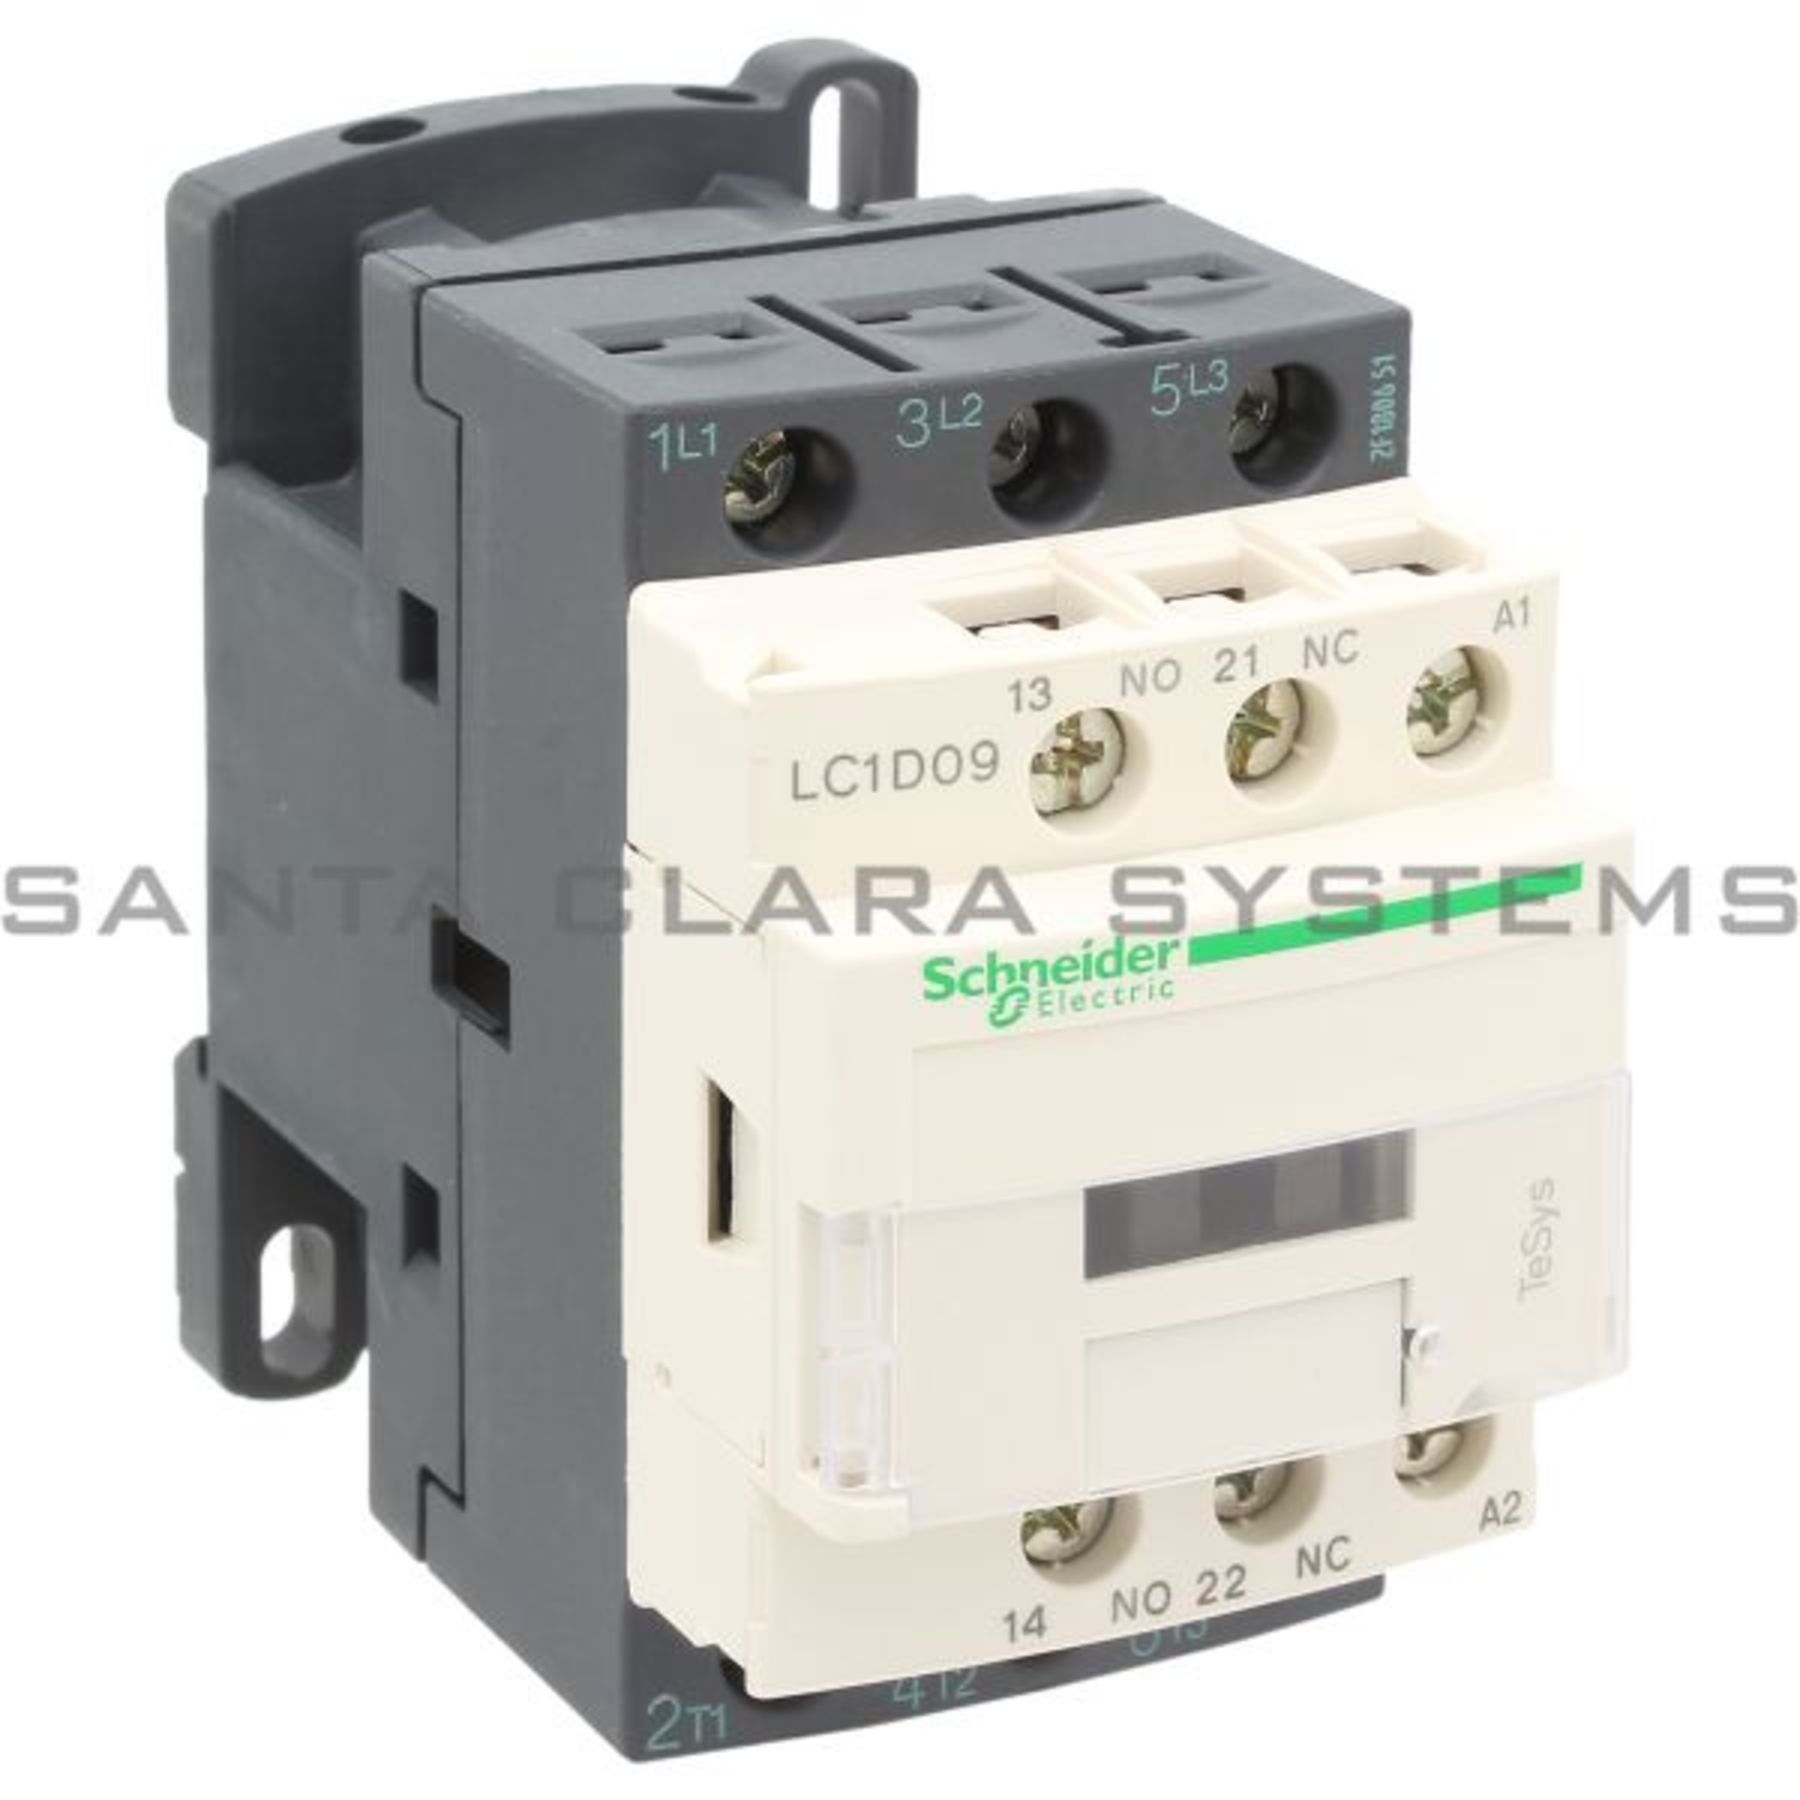 4kw/400V, 5Hp/480V NEW Telemecanique LC1D093F7 Contactor FAST SHIPPING! 